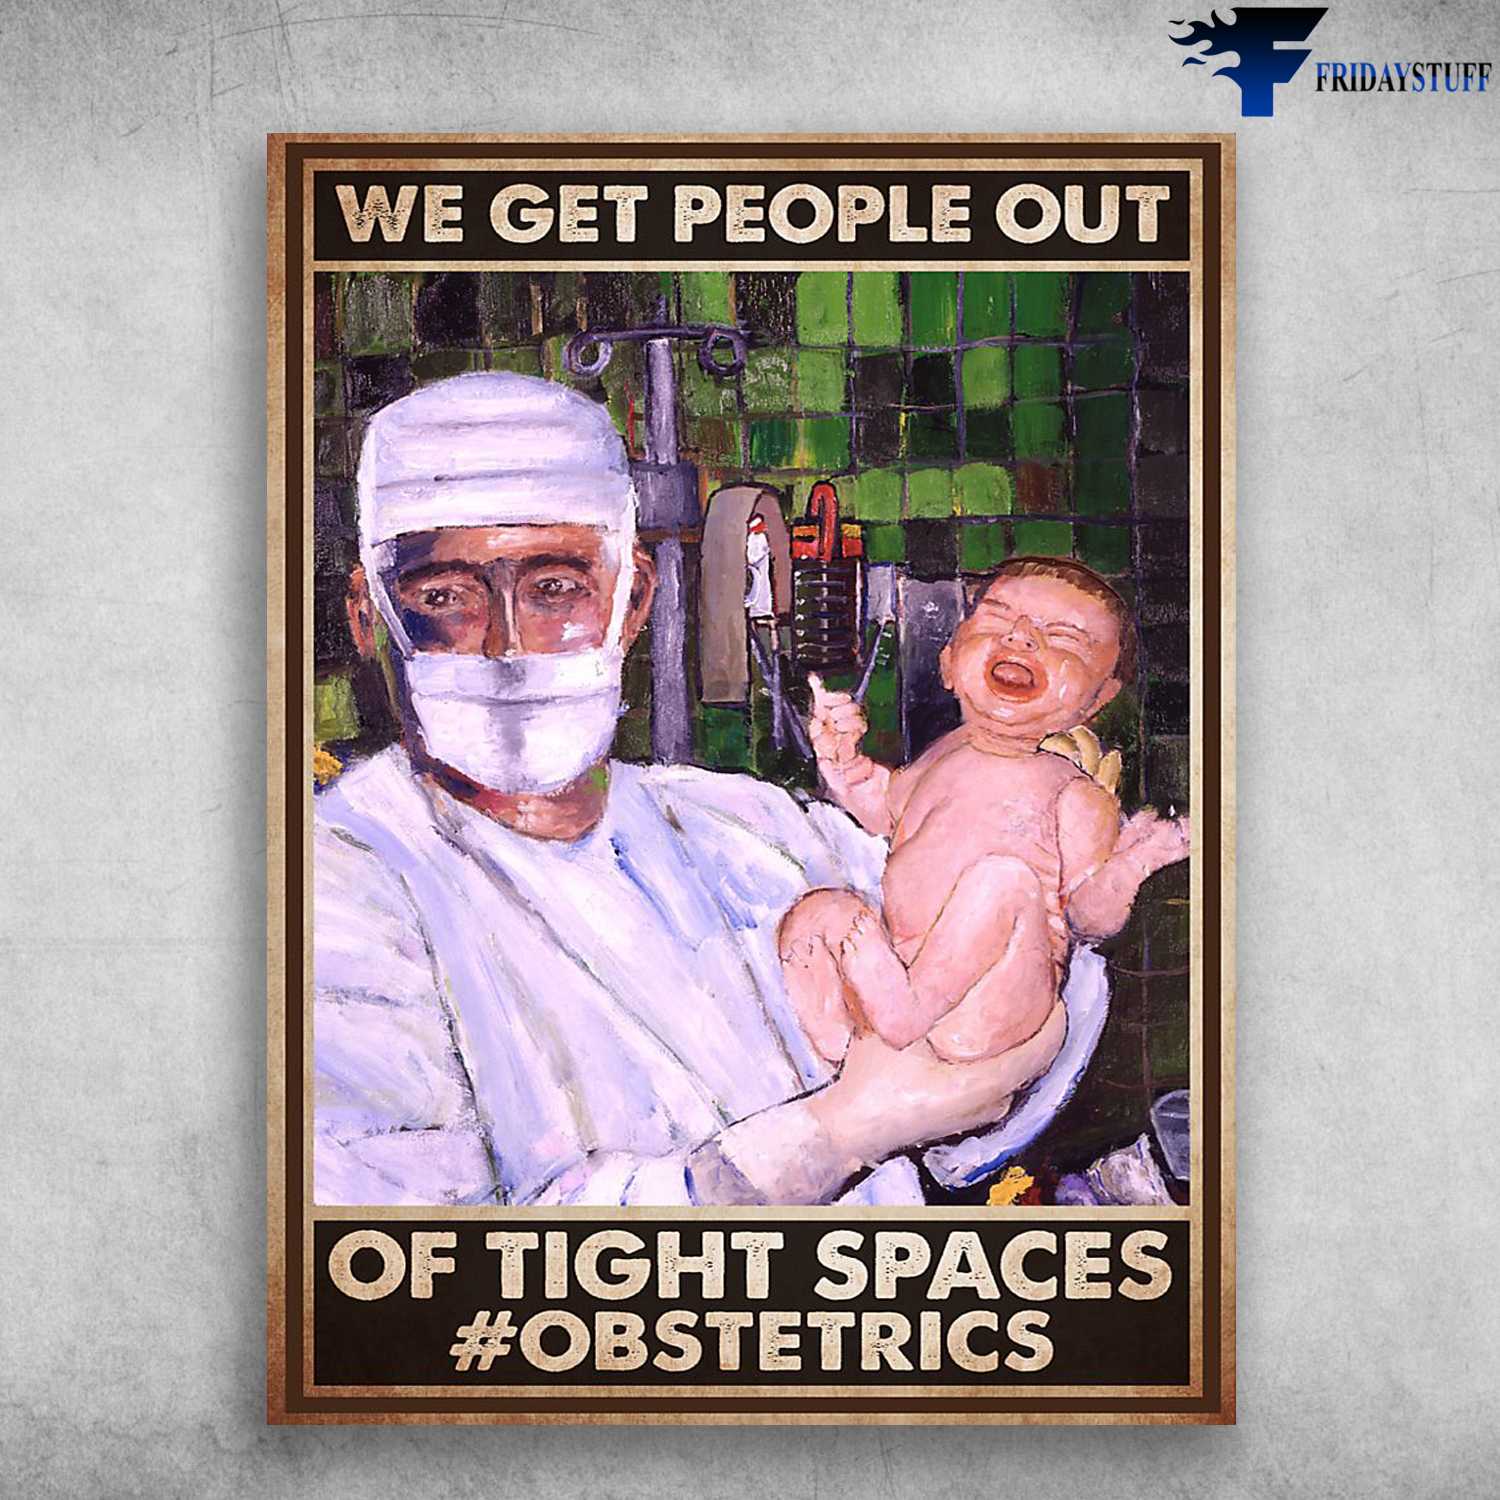 Obstetrics Poster - We Get People Out, Of Tight Spaces, Obstetrics